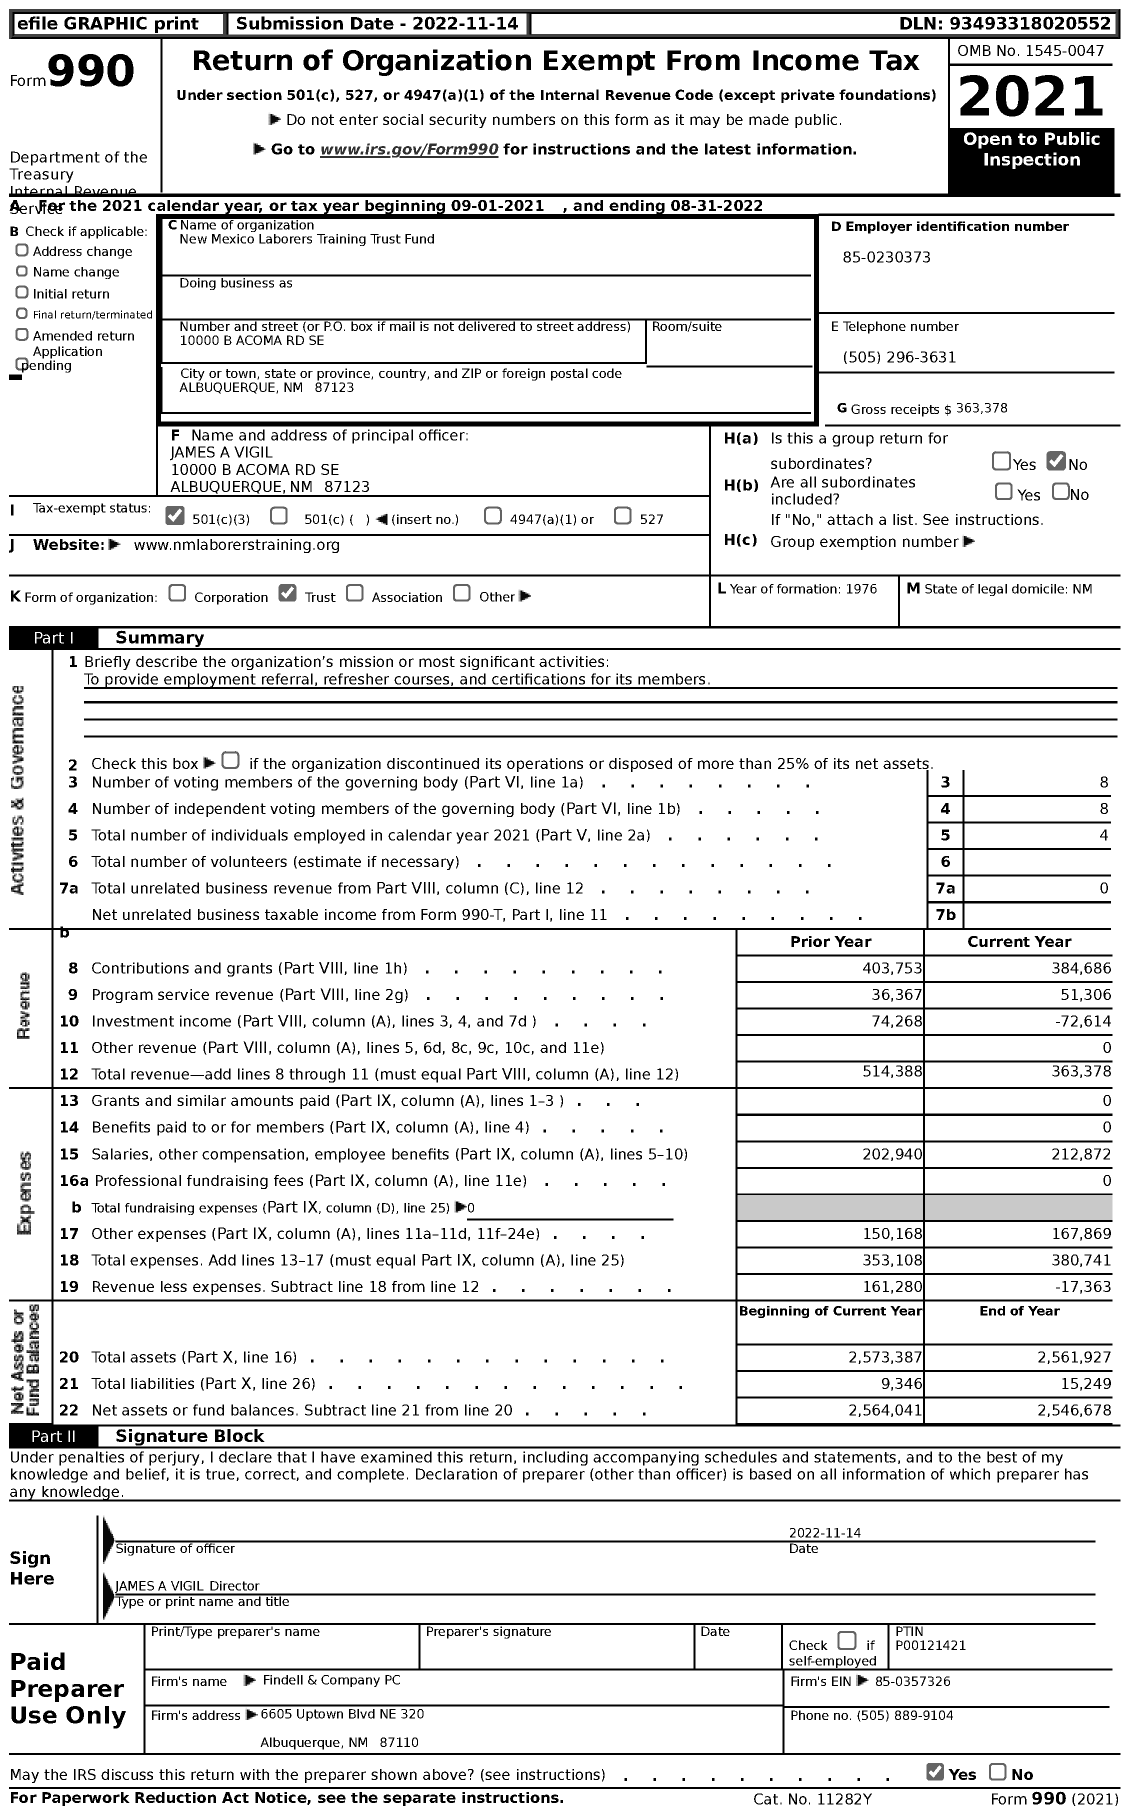 Image of first page of 2021 Form 990 for New Mexico Laborers Training Trust Fund